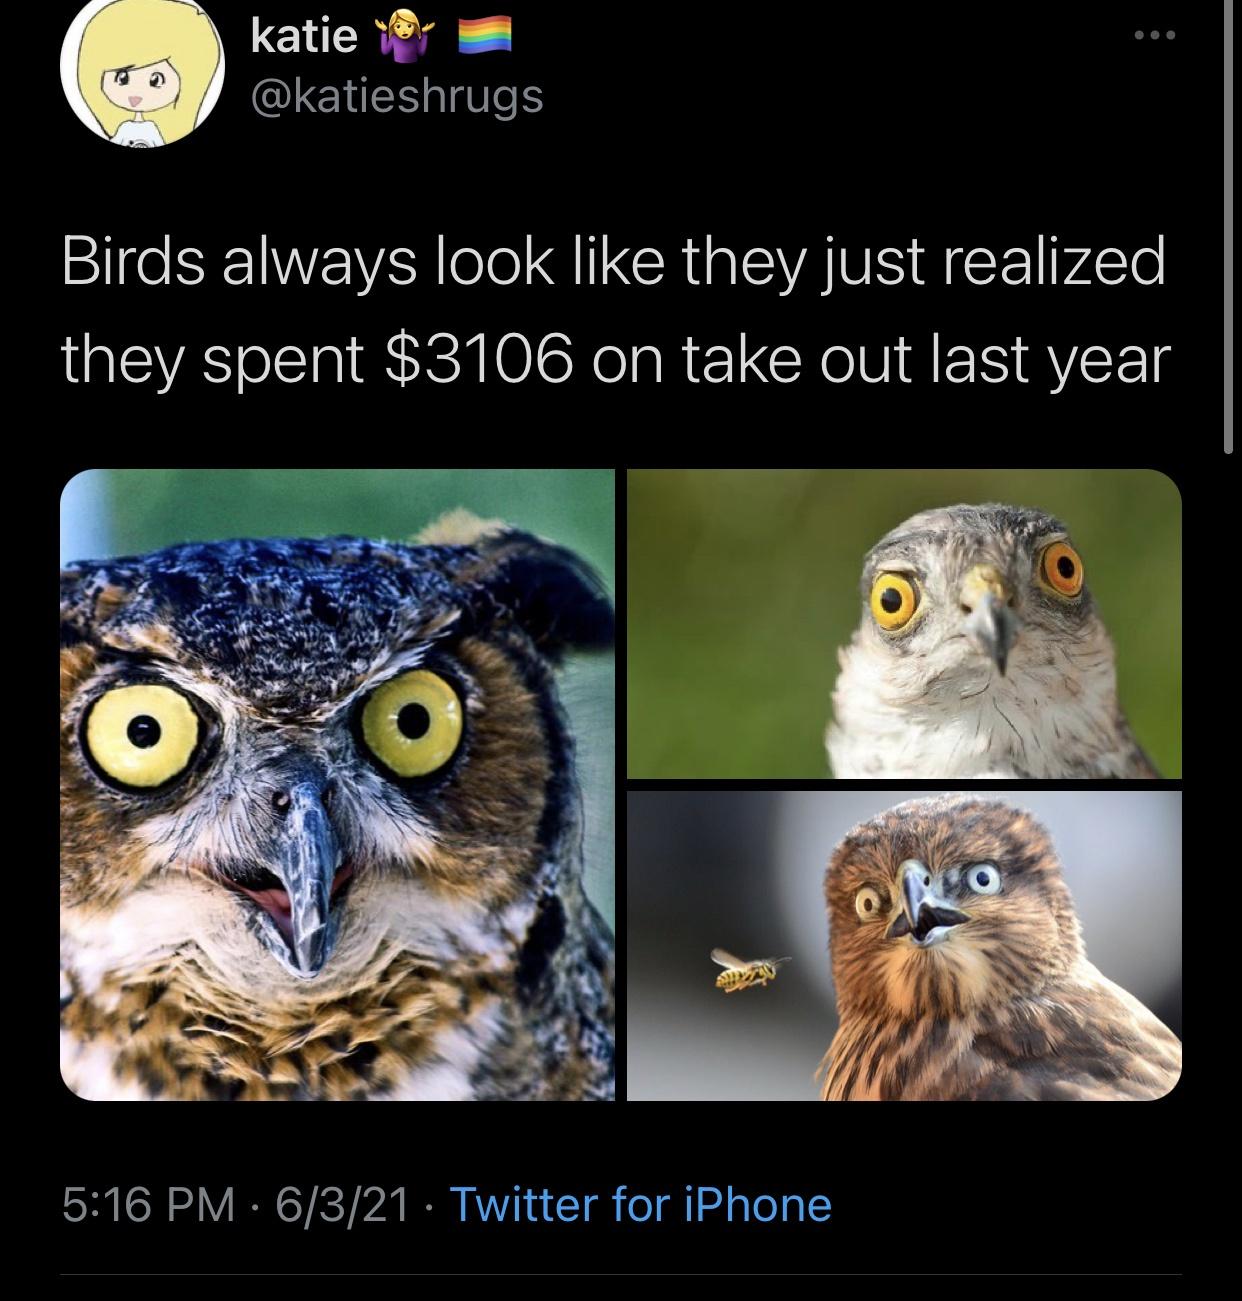 owl - katie Birds always look they just realized they spent $3106 on take out last year O 6321 Twitter for iPhone